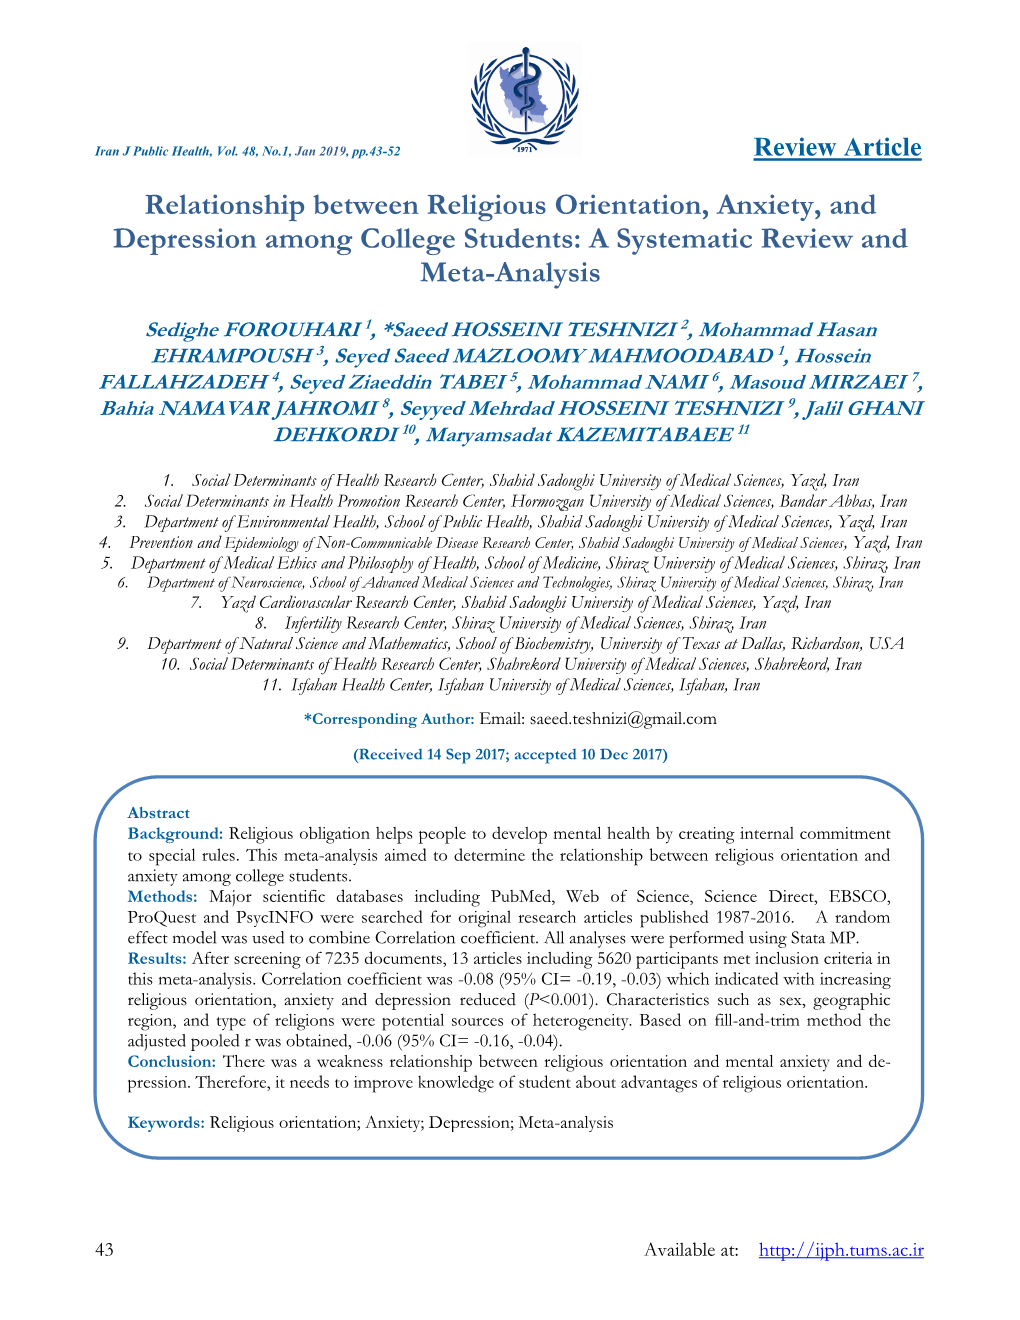 Relationship Between Religious Orientation, Anxiety, and Depression Among College Students: a Systematic Review and Meta-Analysis